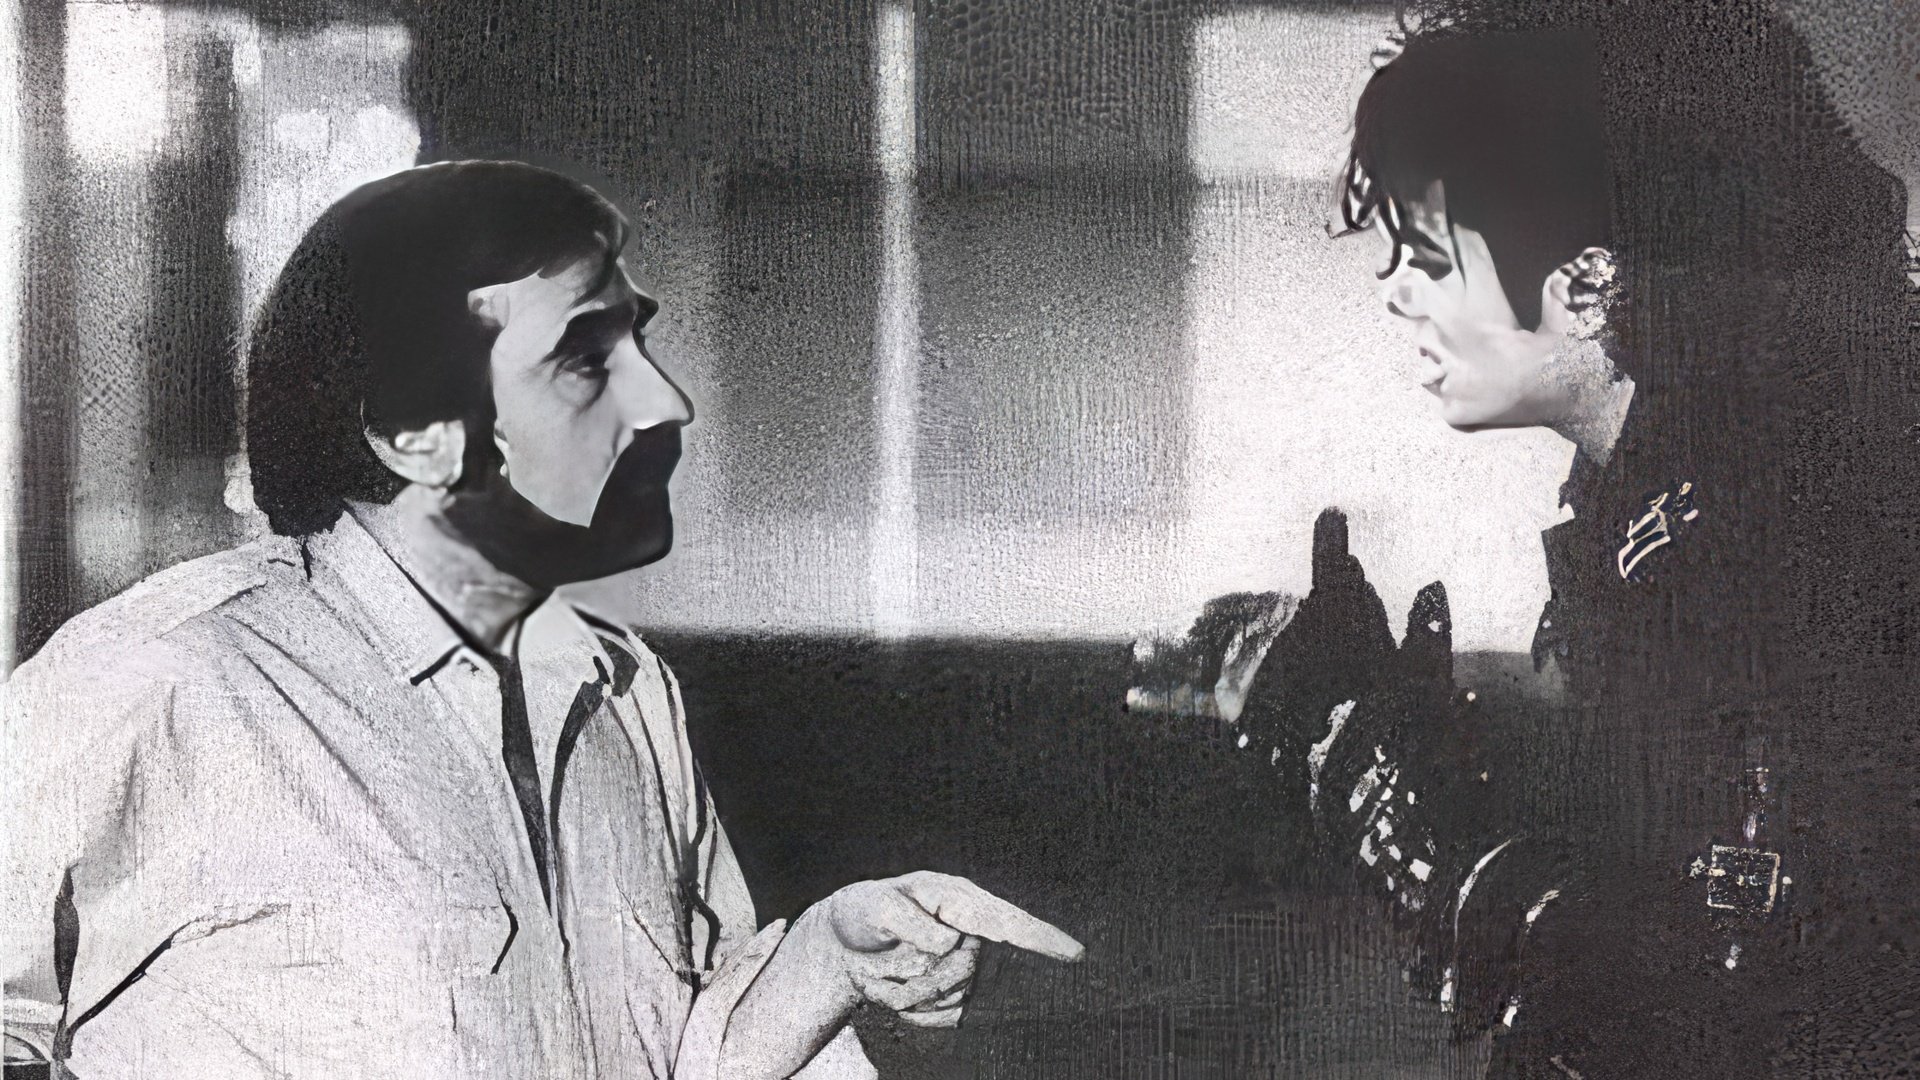 Martin Scorsese and Michael Jackson on the set of 'Bad' music video